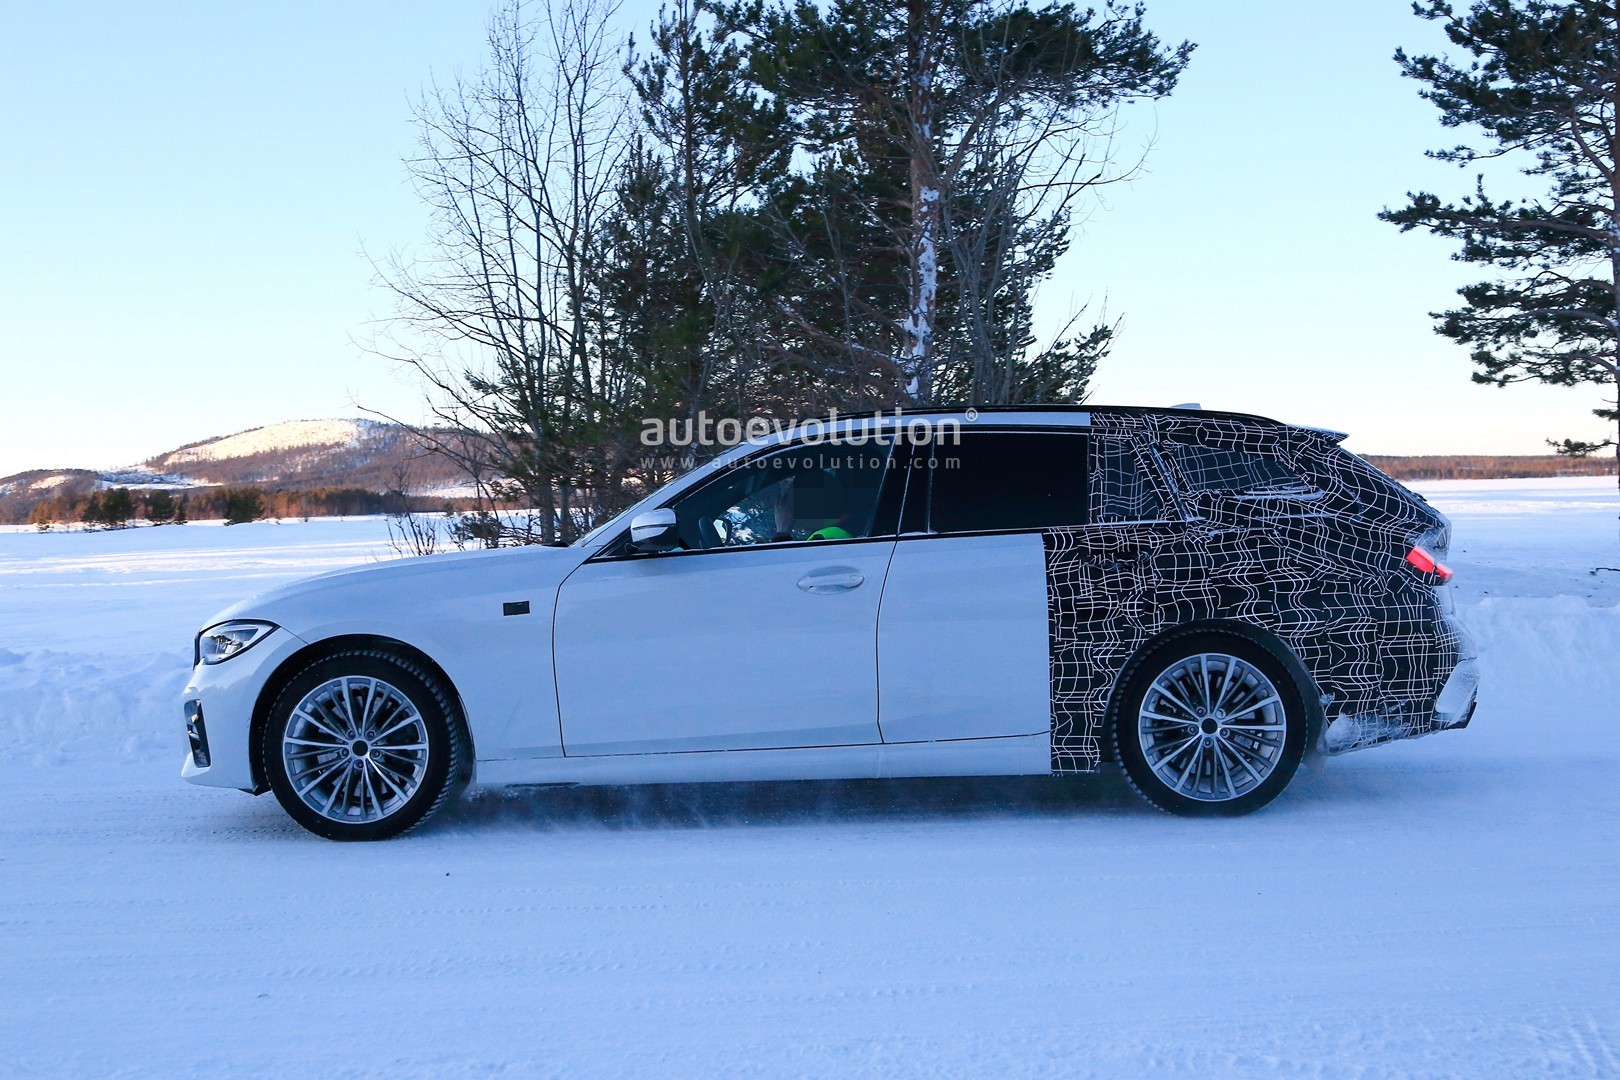 2020-bmw-3-series-touring-spied-winter-testing-with-m-sport-package_4.jpg